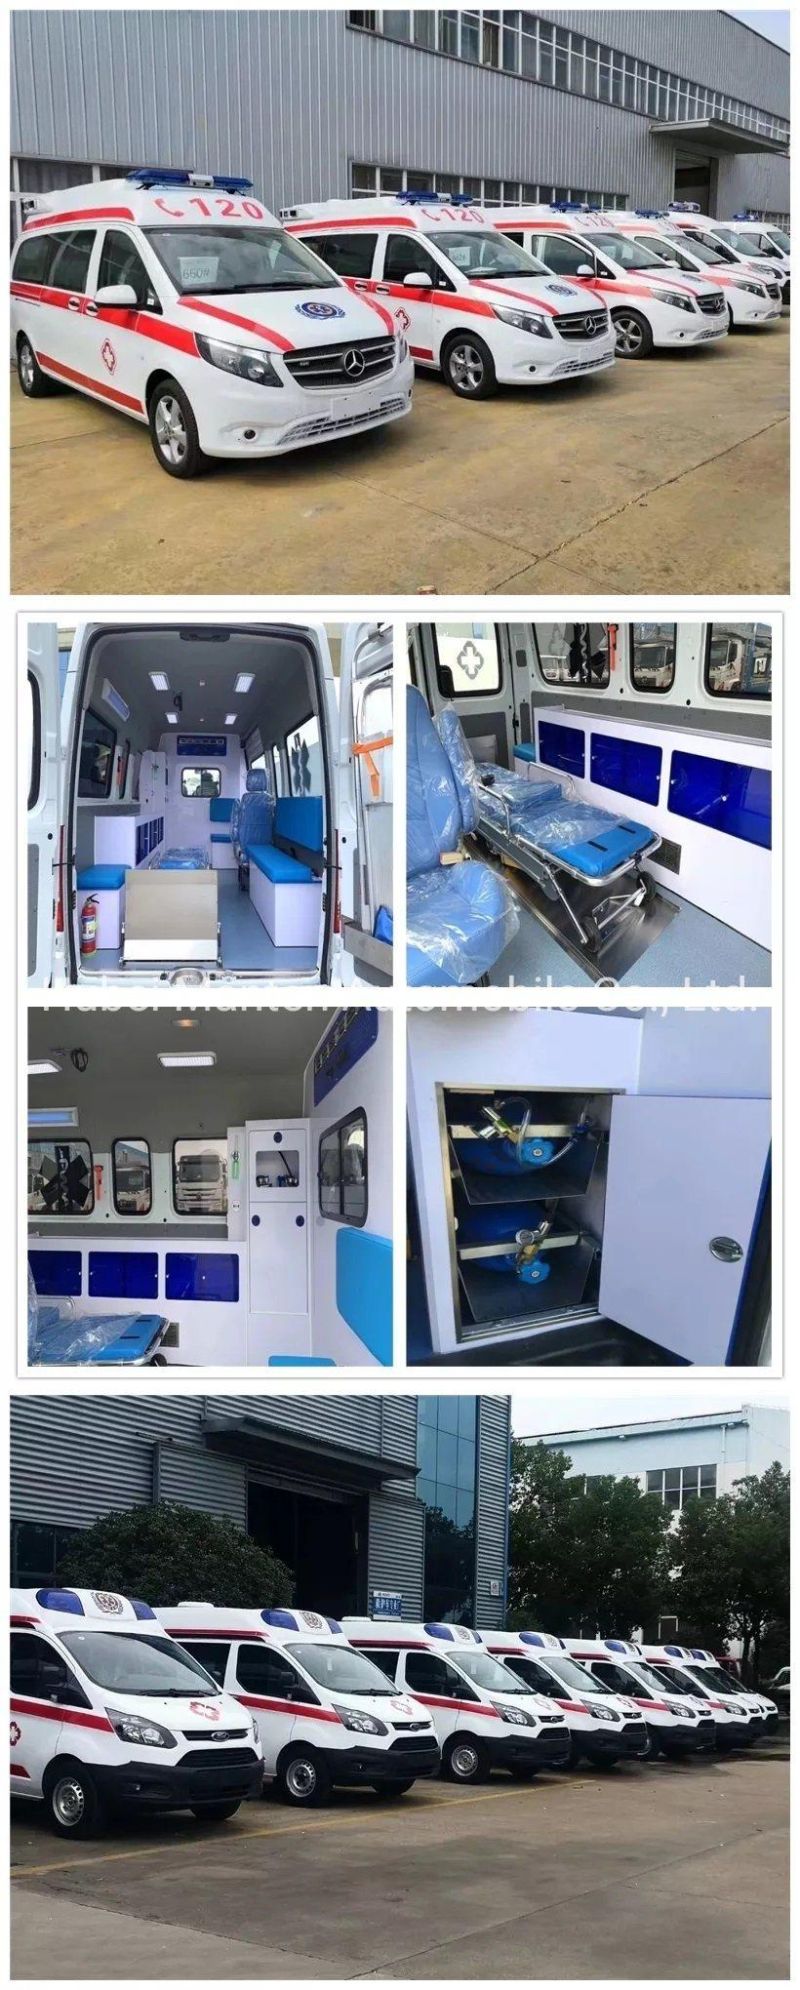 I-Veco 4X4 off-Road Ambulance Car Price 4WD Emergency Medical Vehicle for Sale